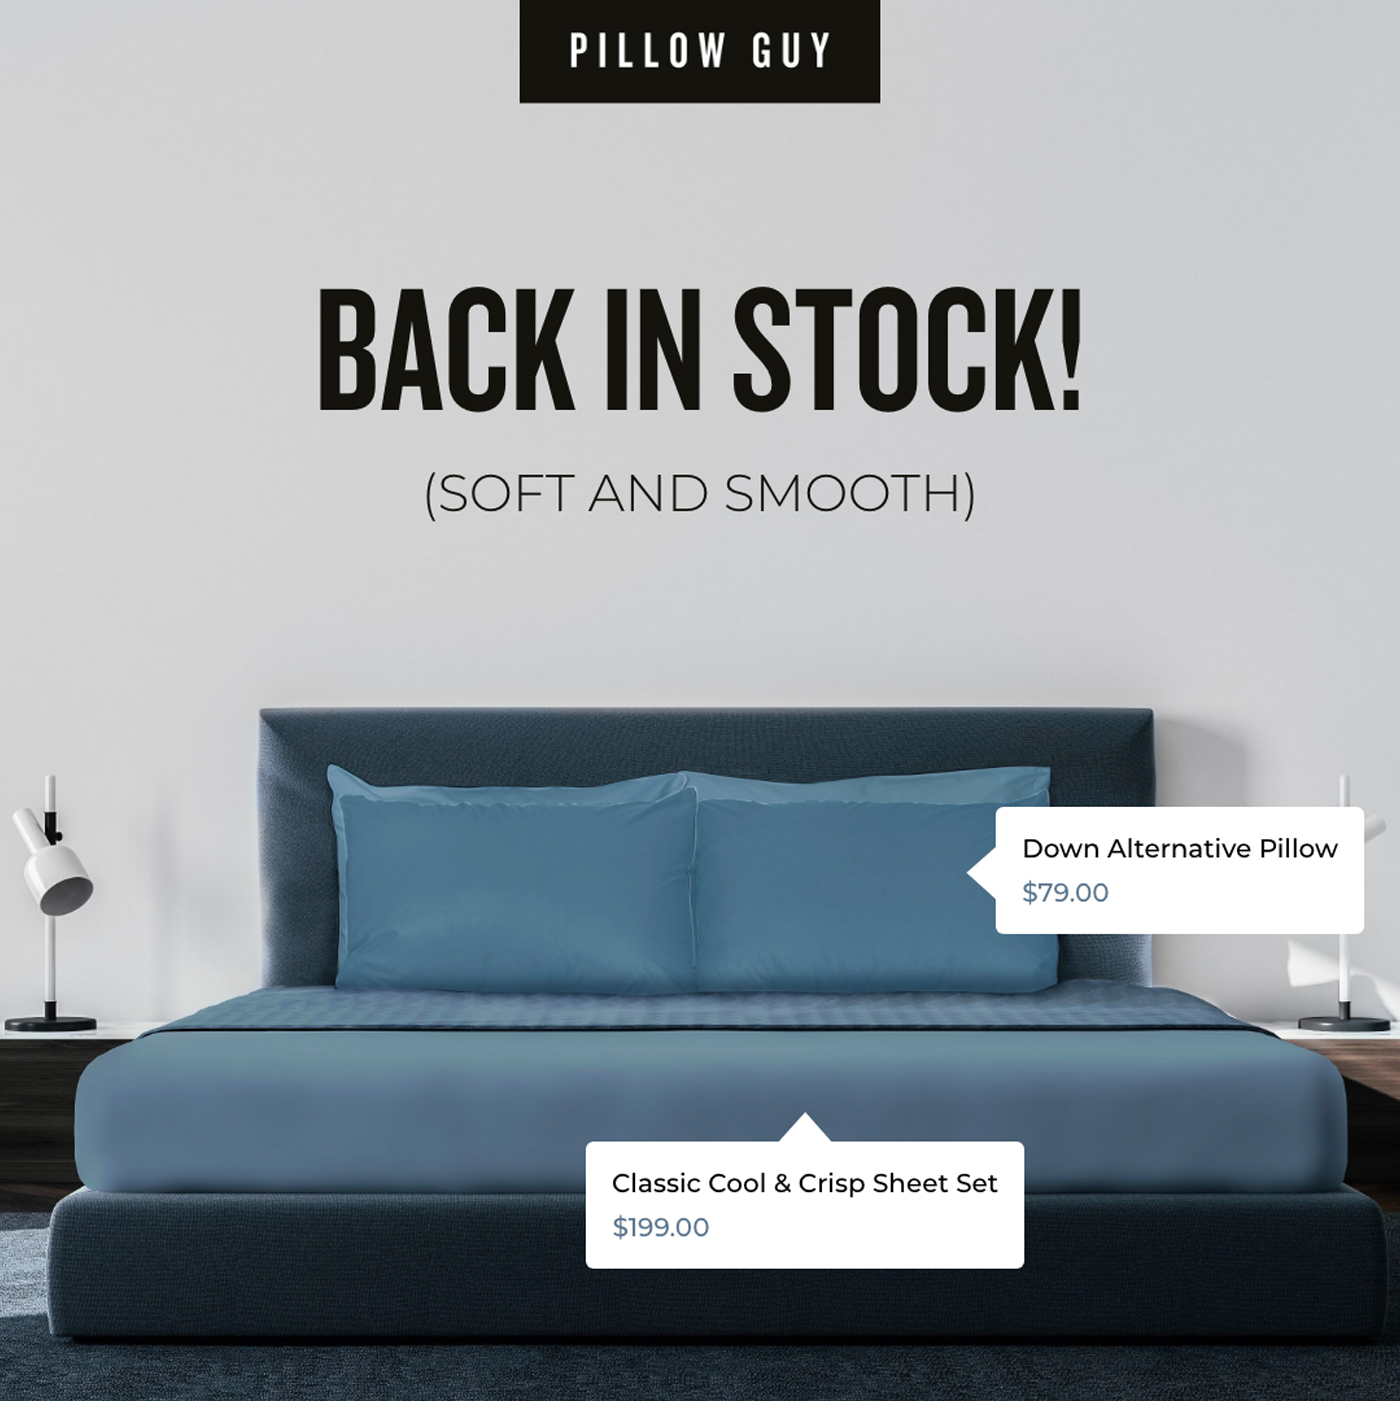 Pillow Guy Smooth and Soft Facebook Ad Design